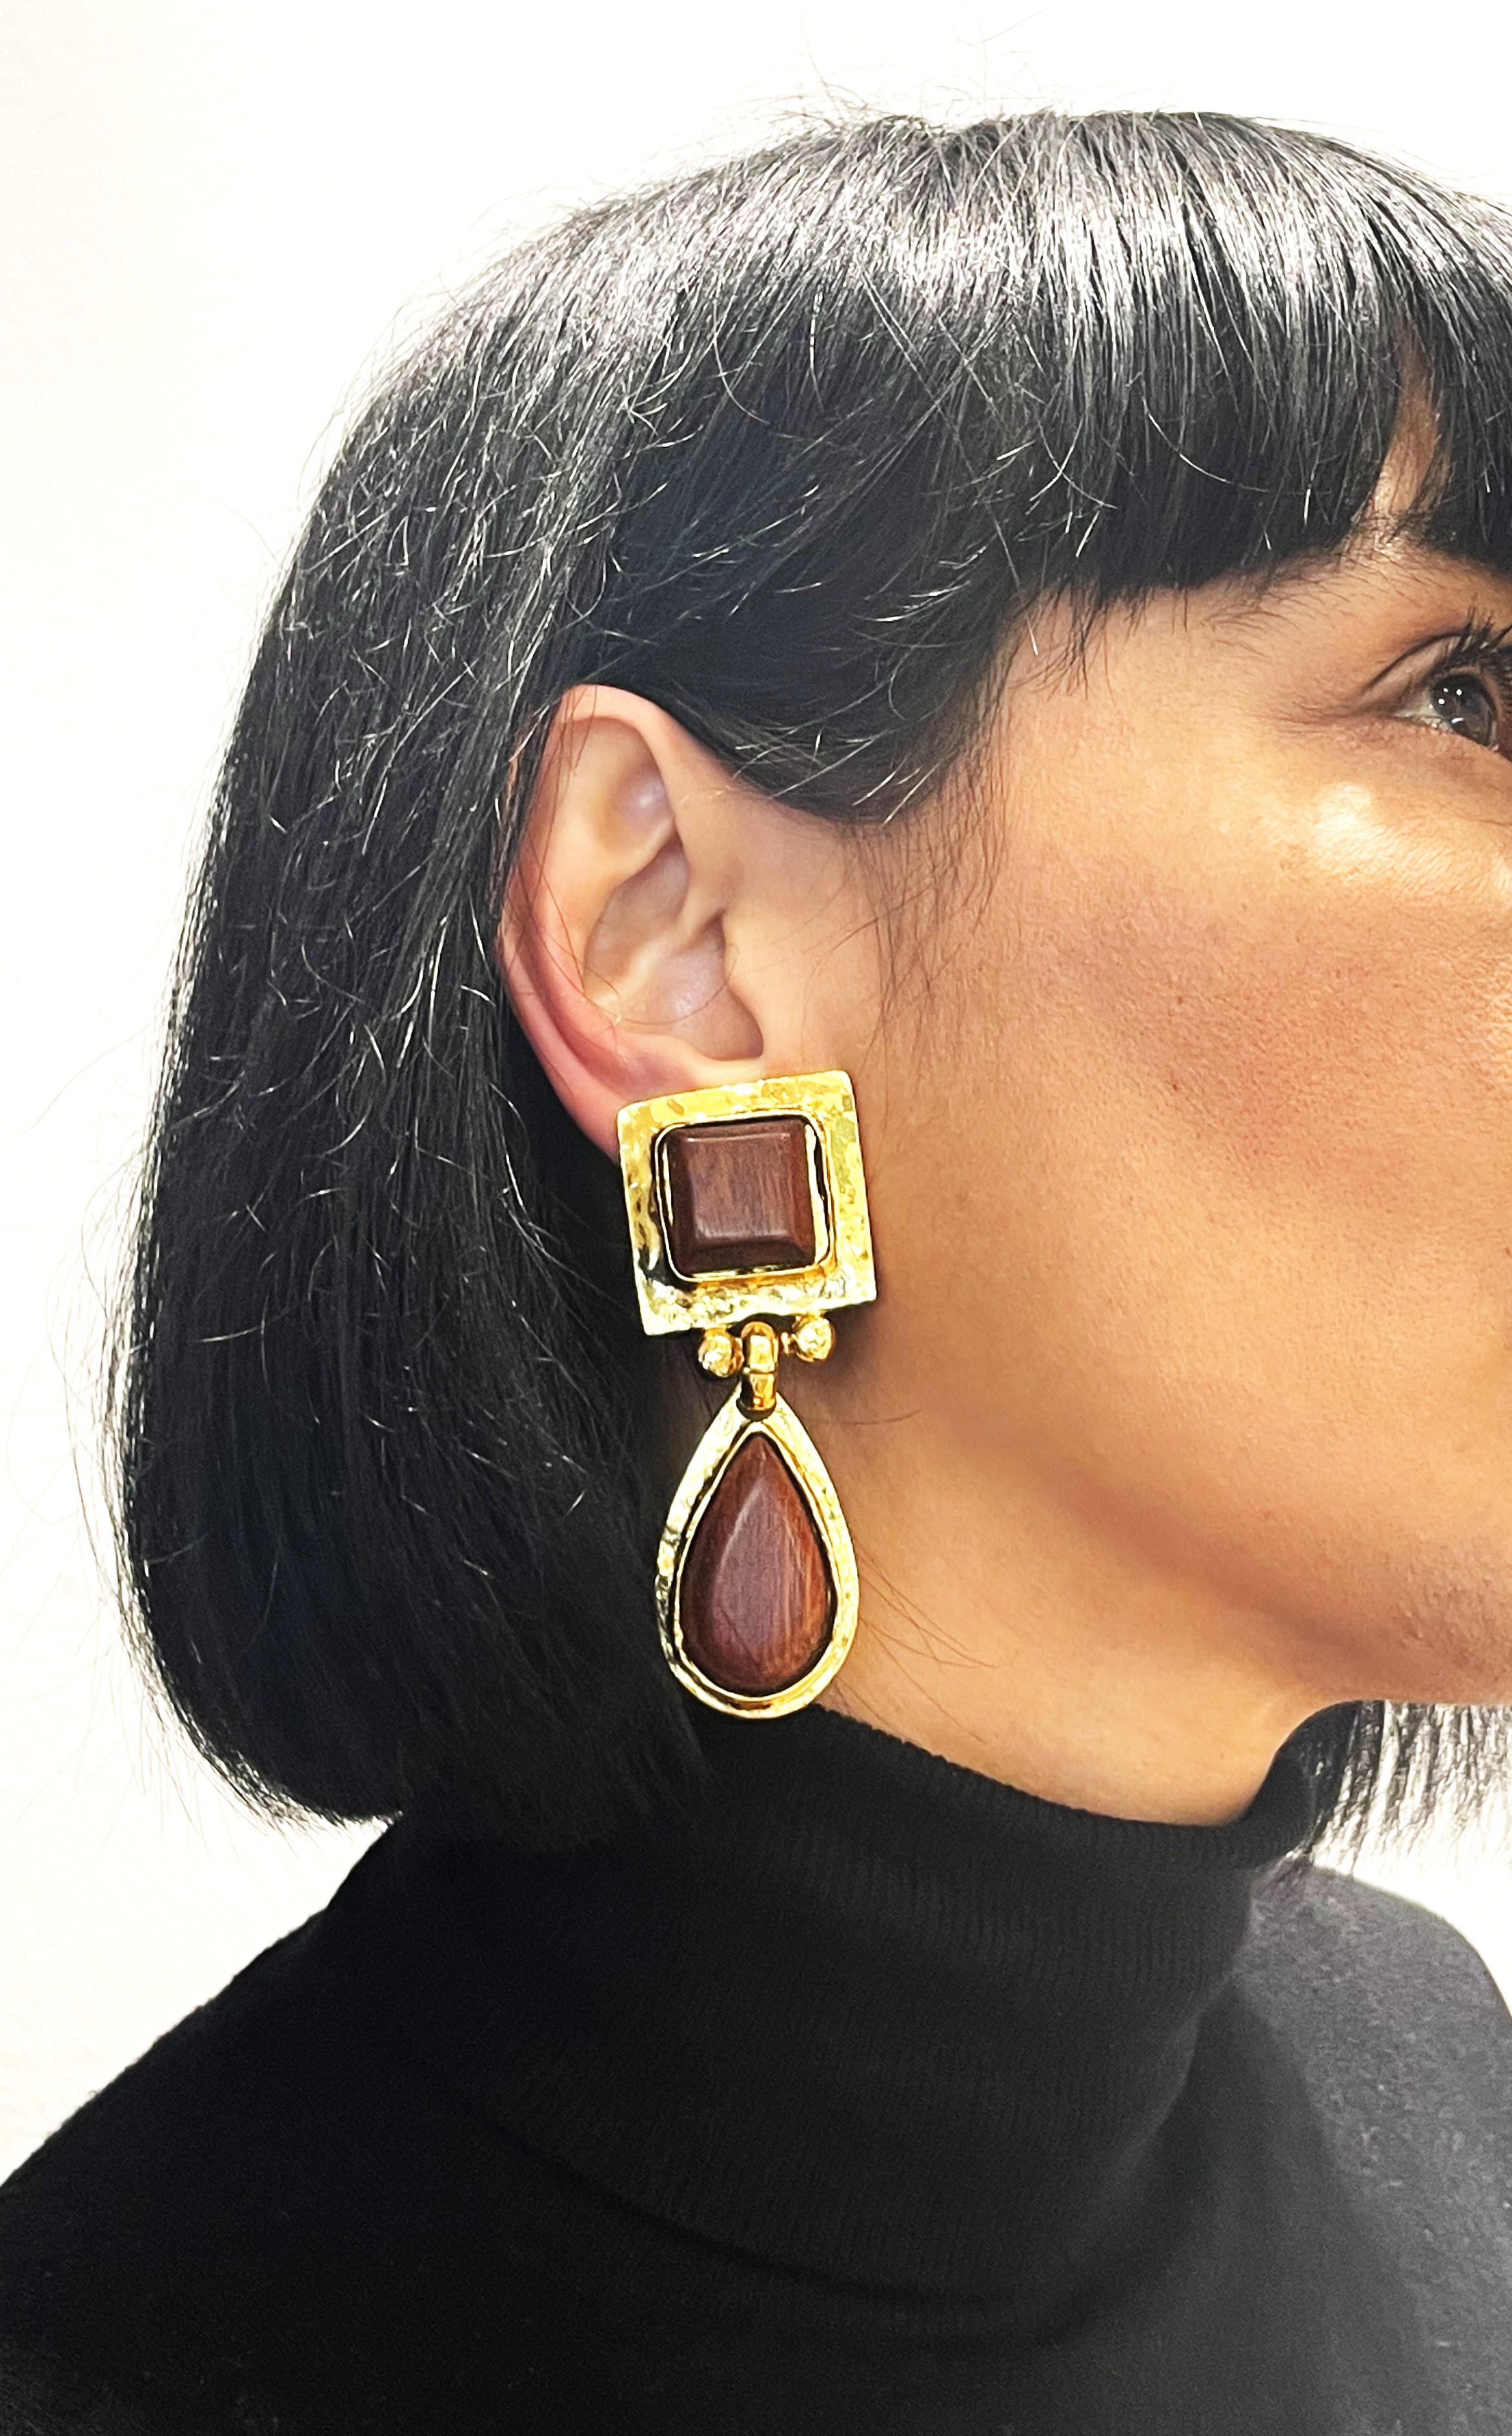 Long decorative ear clips signed Eduard Rambaud Paris consisting of a square gold-plated part with a drop hanging from it. Filled in with brown wood. 

Measurement: Full length 8 cm, upper square part 3 x 3 cm, attached drop 4.5 cm

Features:
-